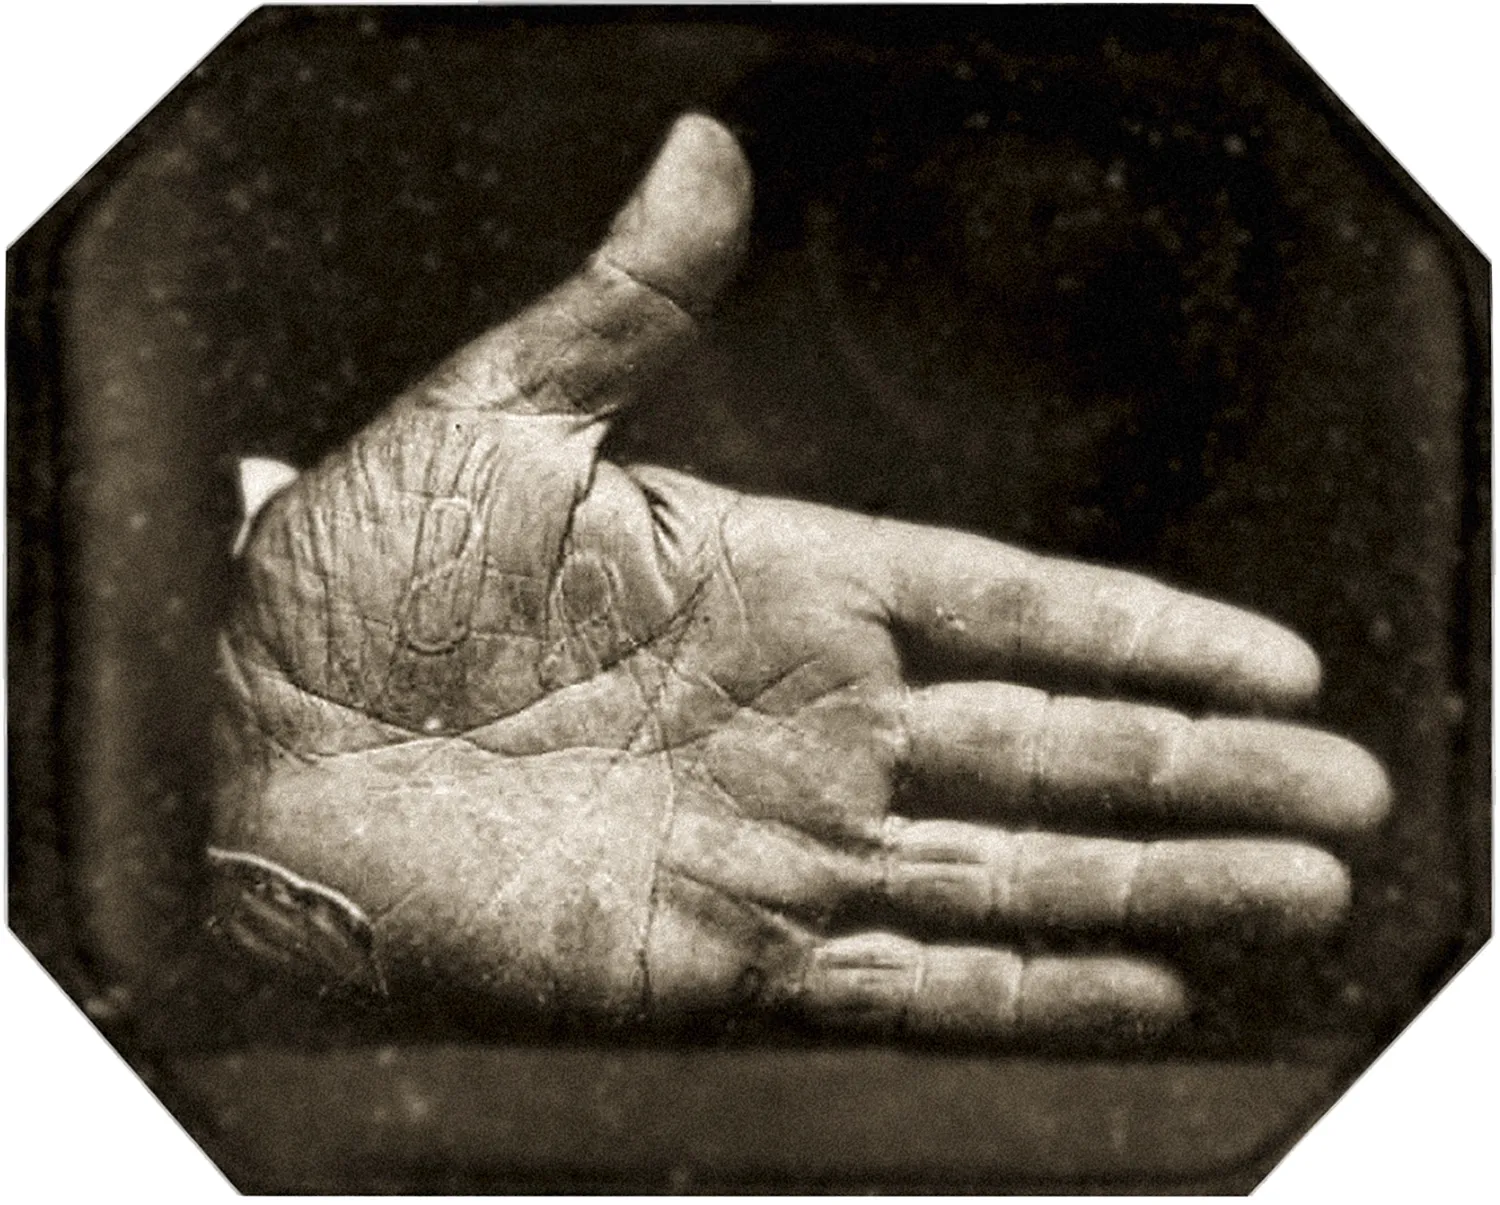 Johanthan Walker’s right hand with “SS” branded onto the palm. 